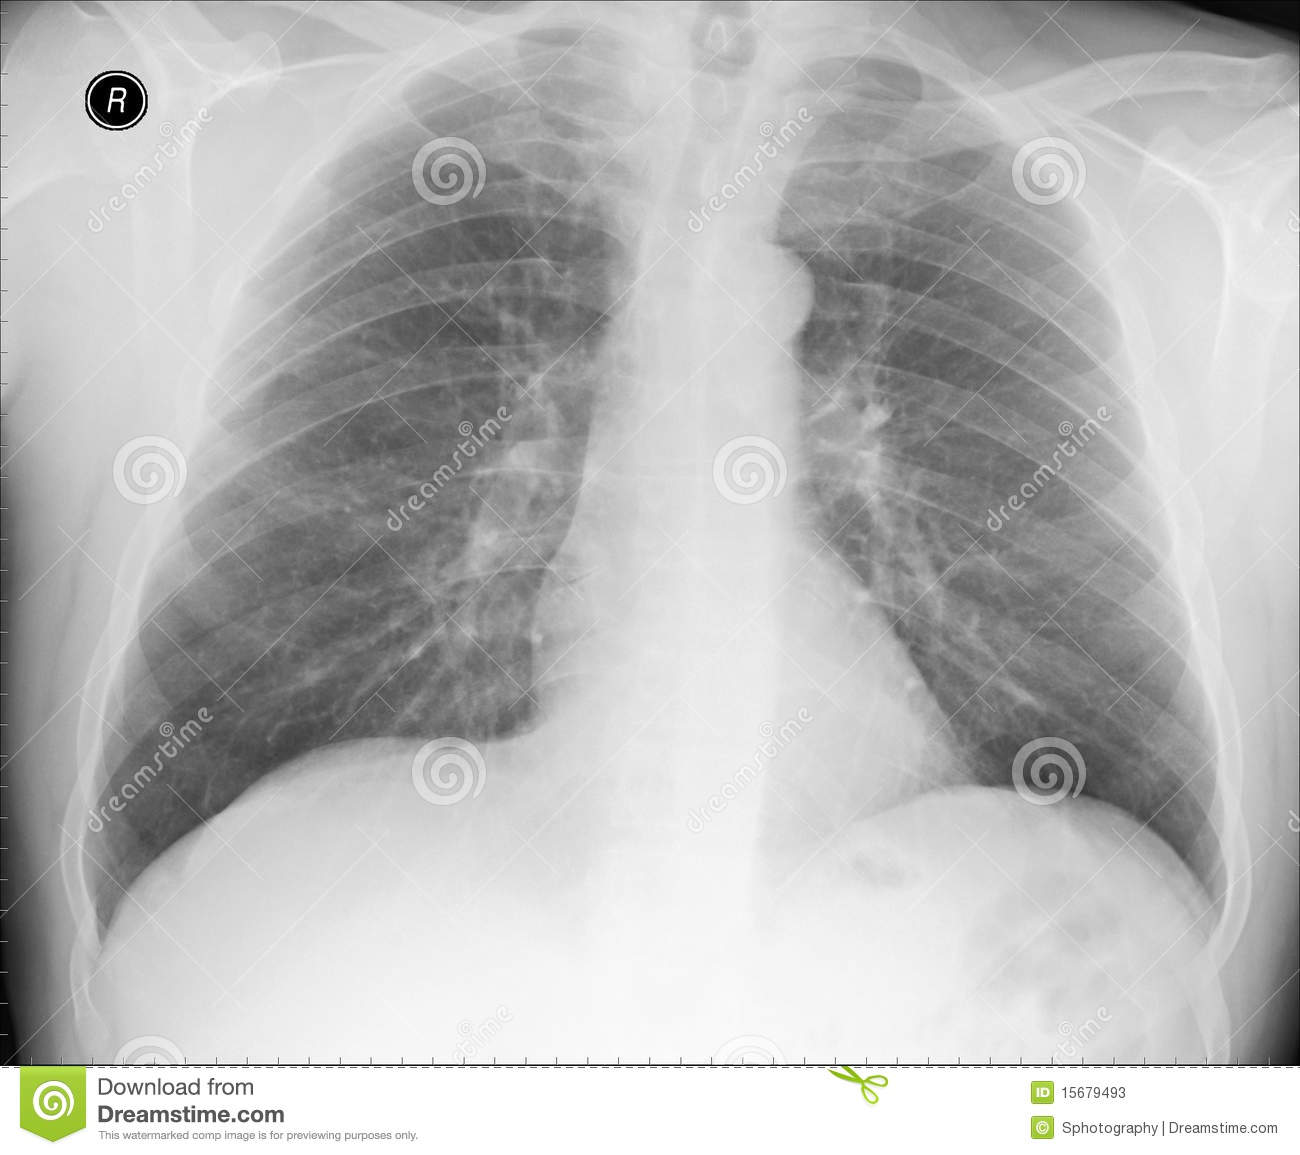 This Is Chest X Ray Of A Male Without Any Abnormalities